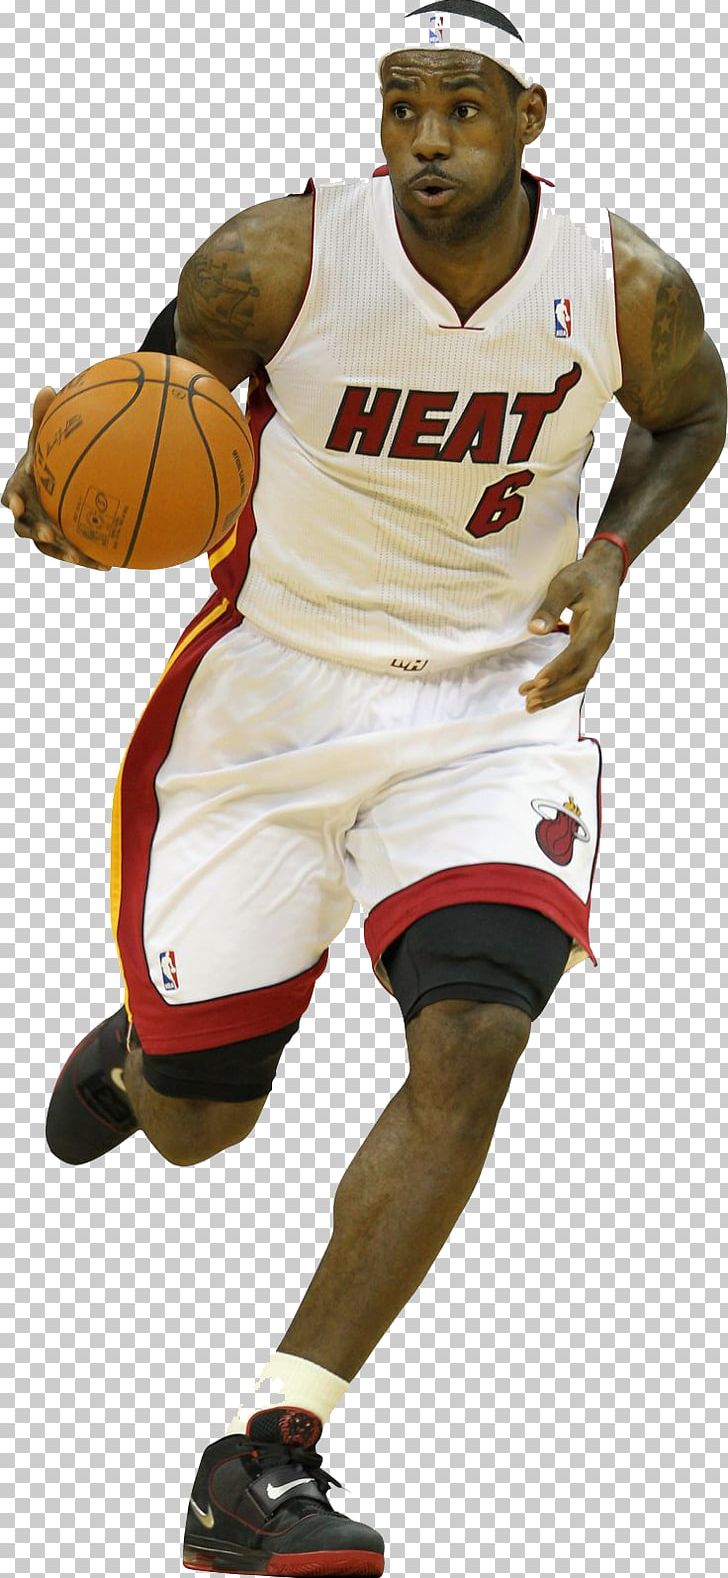 LeBron James Basketball Miami Heat NBA Cleveland Cavaliers PNG, Clipart, Athlete, Ball Game, Baseball Equipment, Basketball Player, Championship Free PNG Download